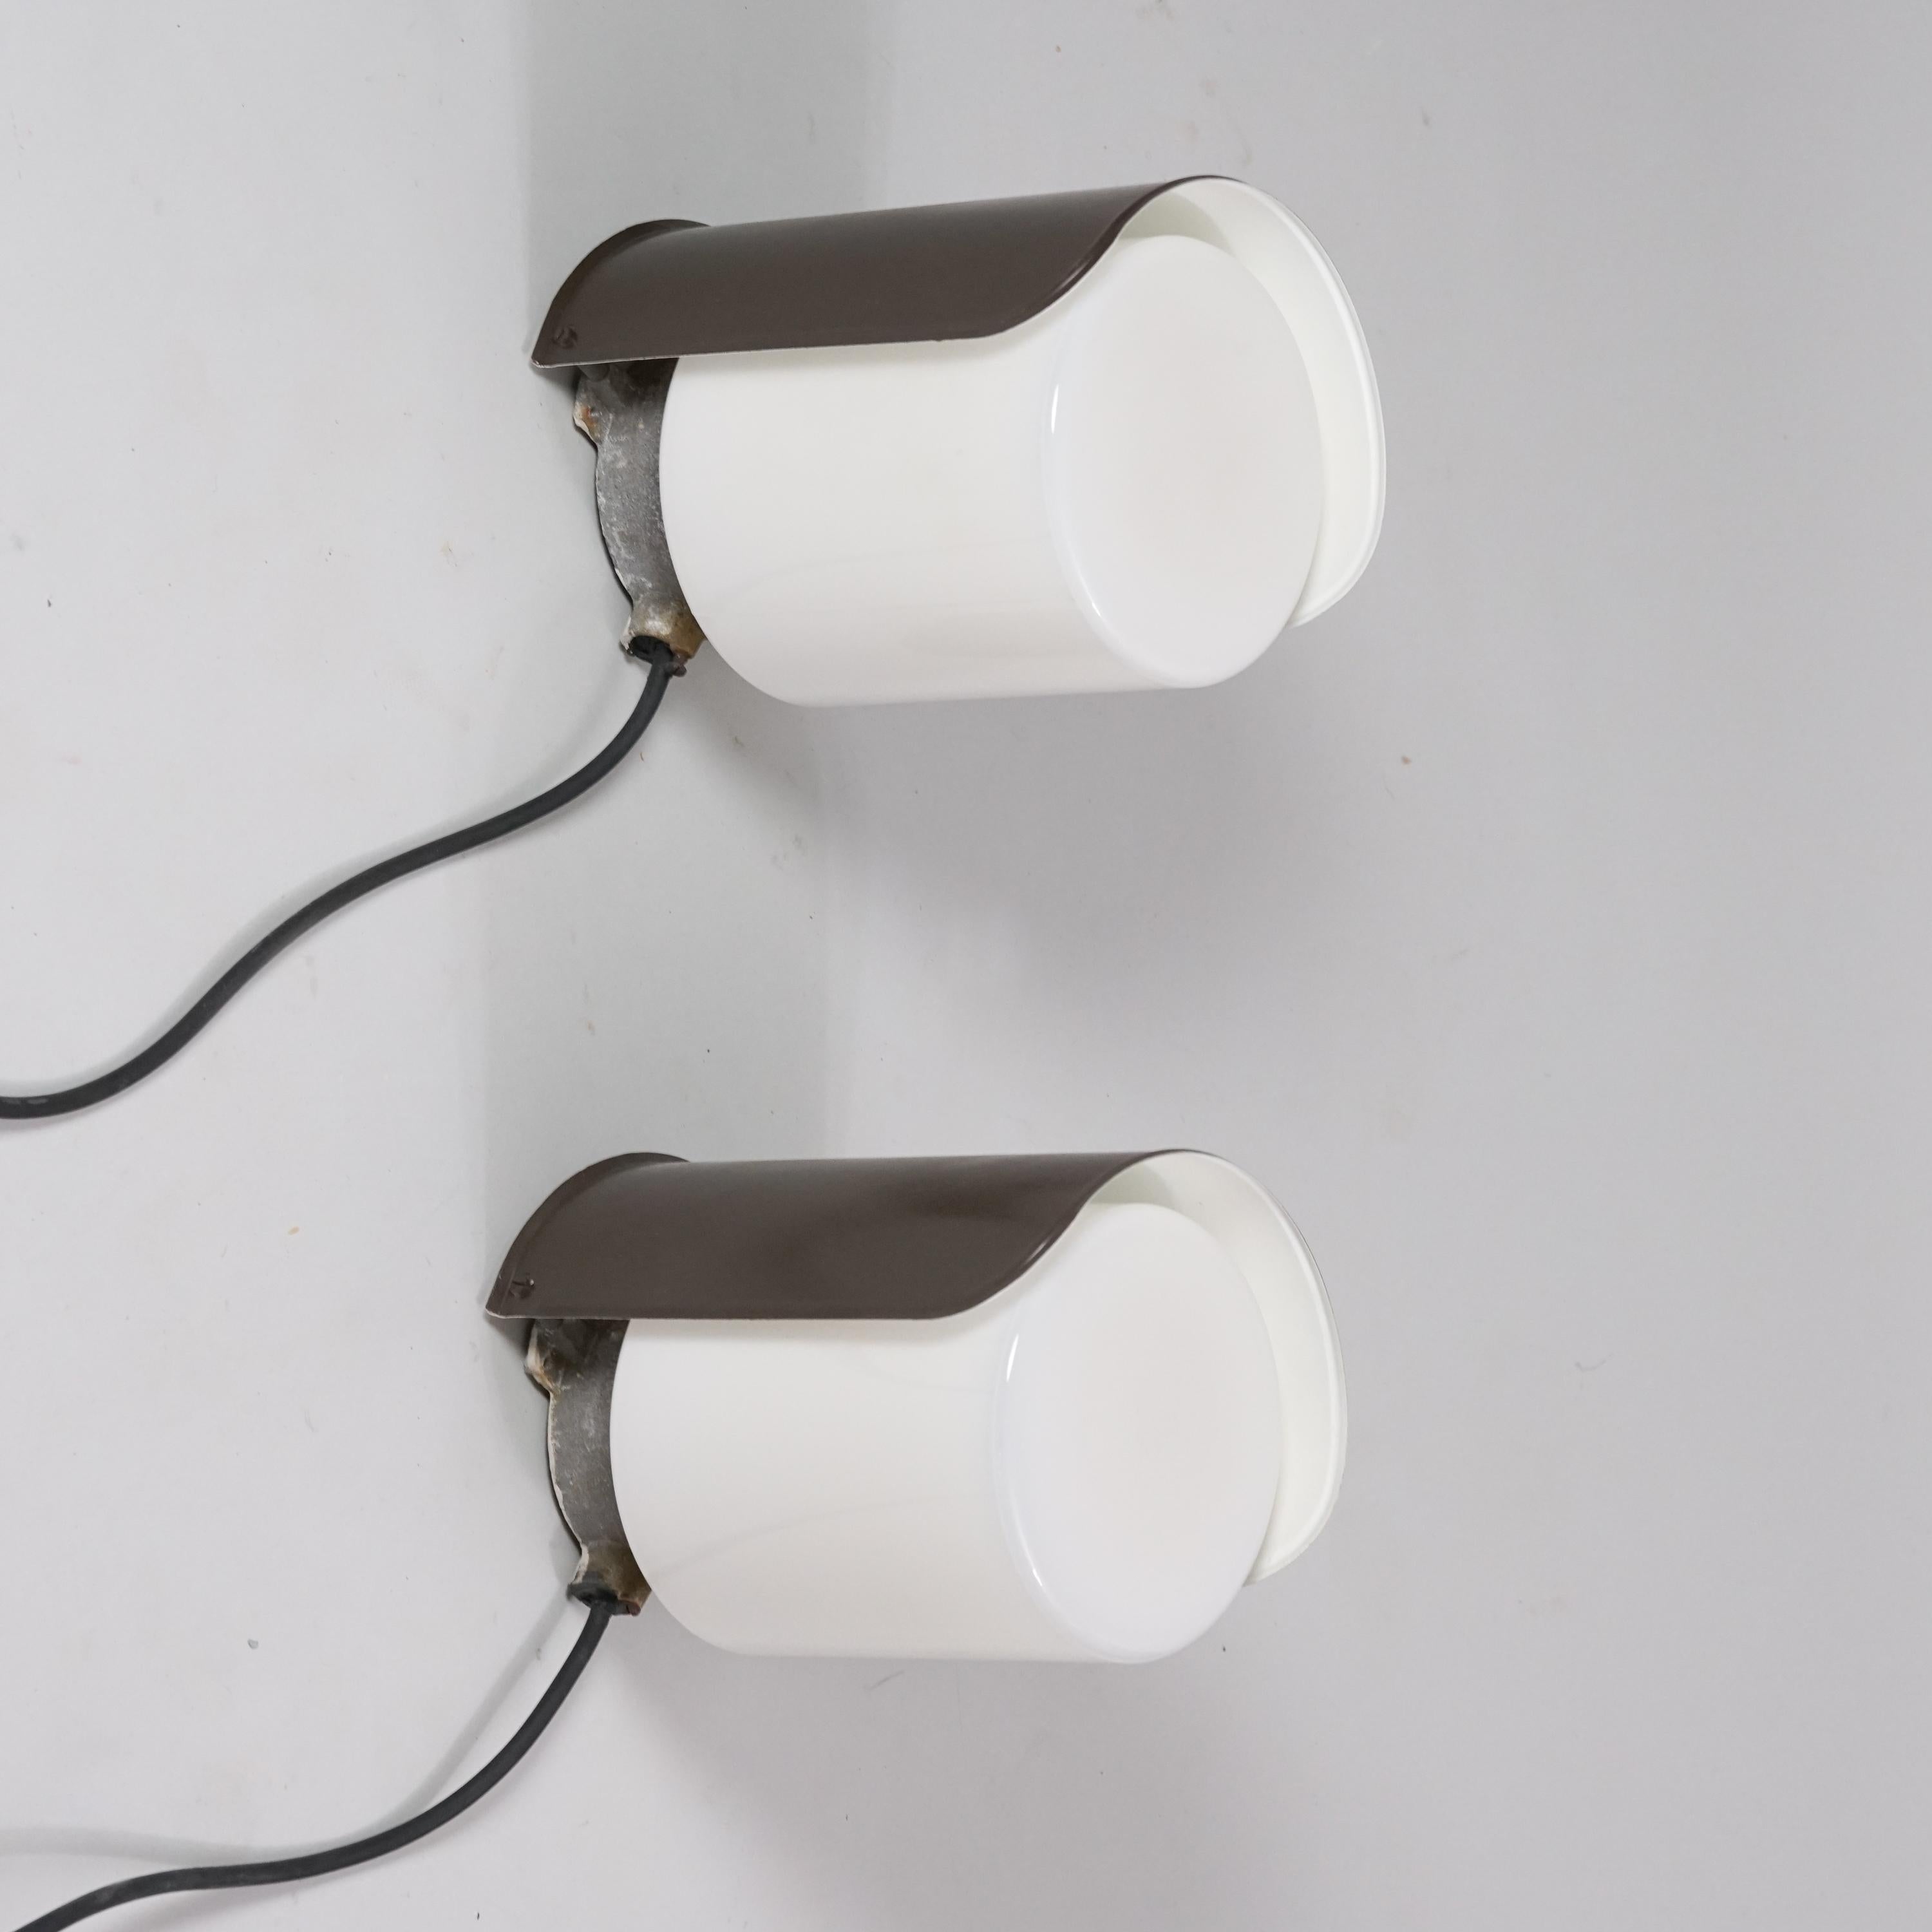 Set of two outdoor wall lights, design by Paavo Tynell, manufactured by Idman Oy, 1950s. Painted metal and milk glass. Good vintage condition, patina consistent with age and use. The wall lights are sold as a set. 

Paavo Tynell (1890-1973) is one